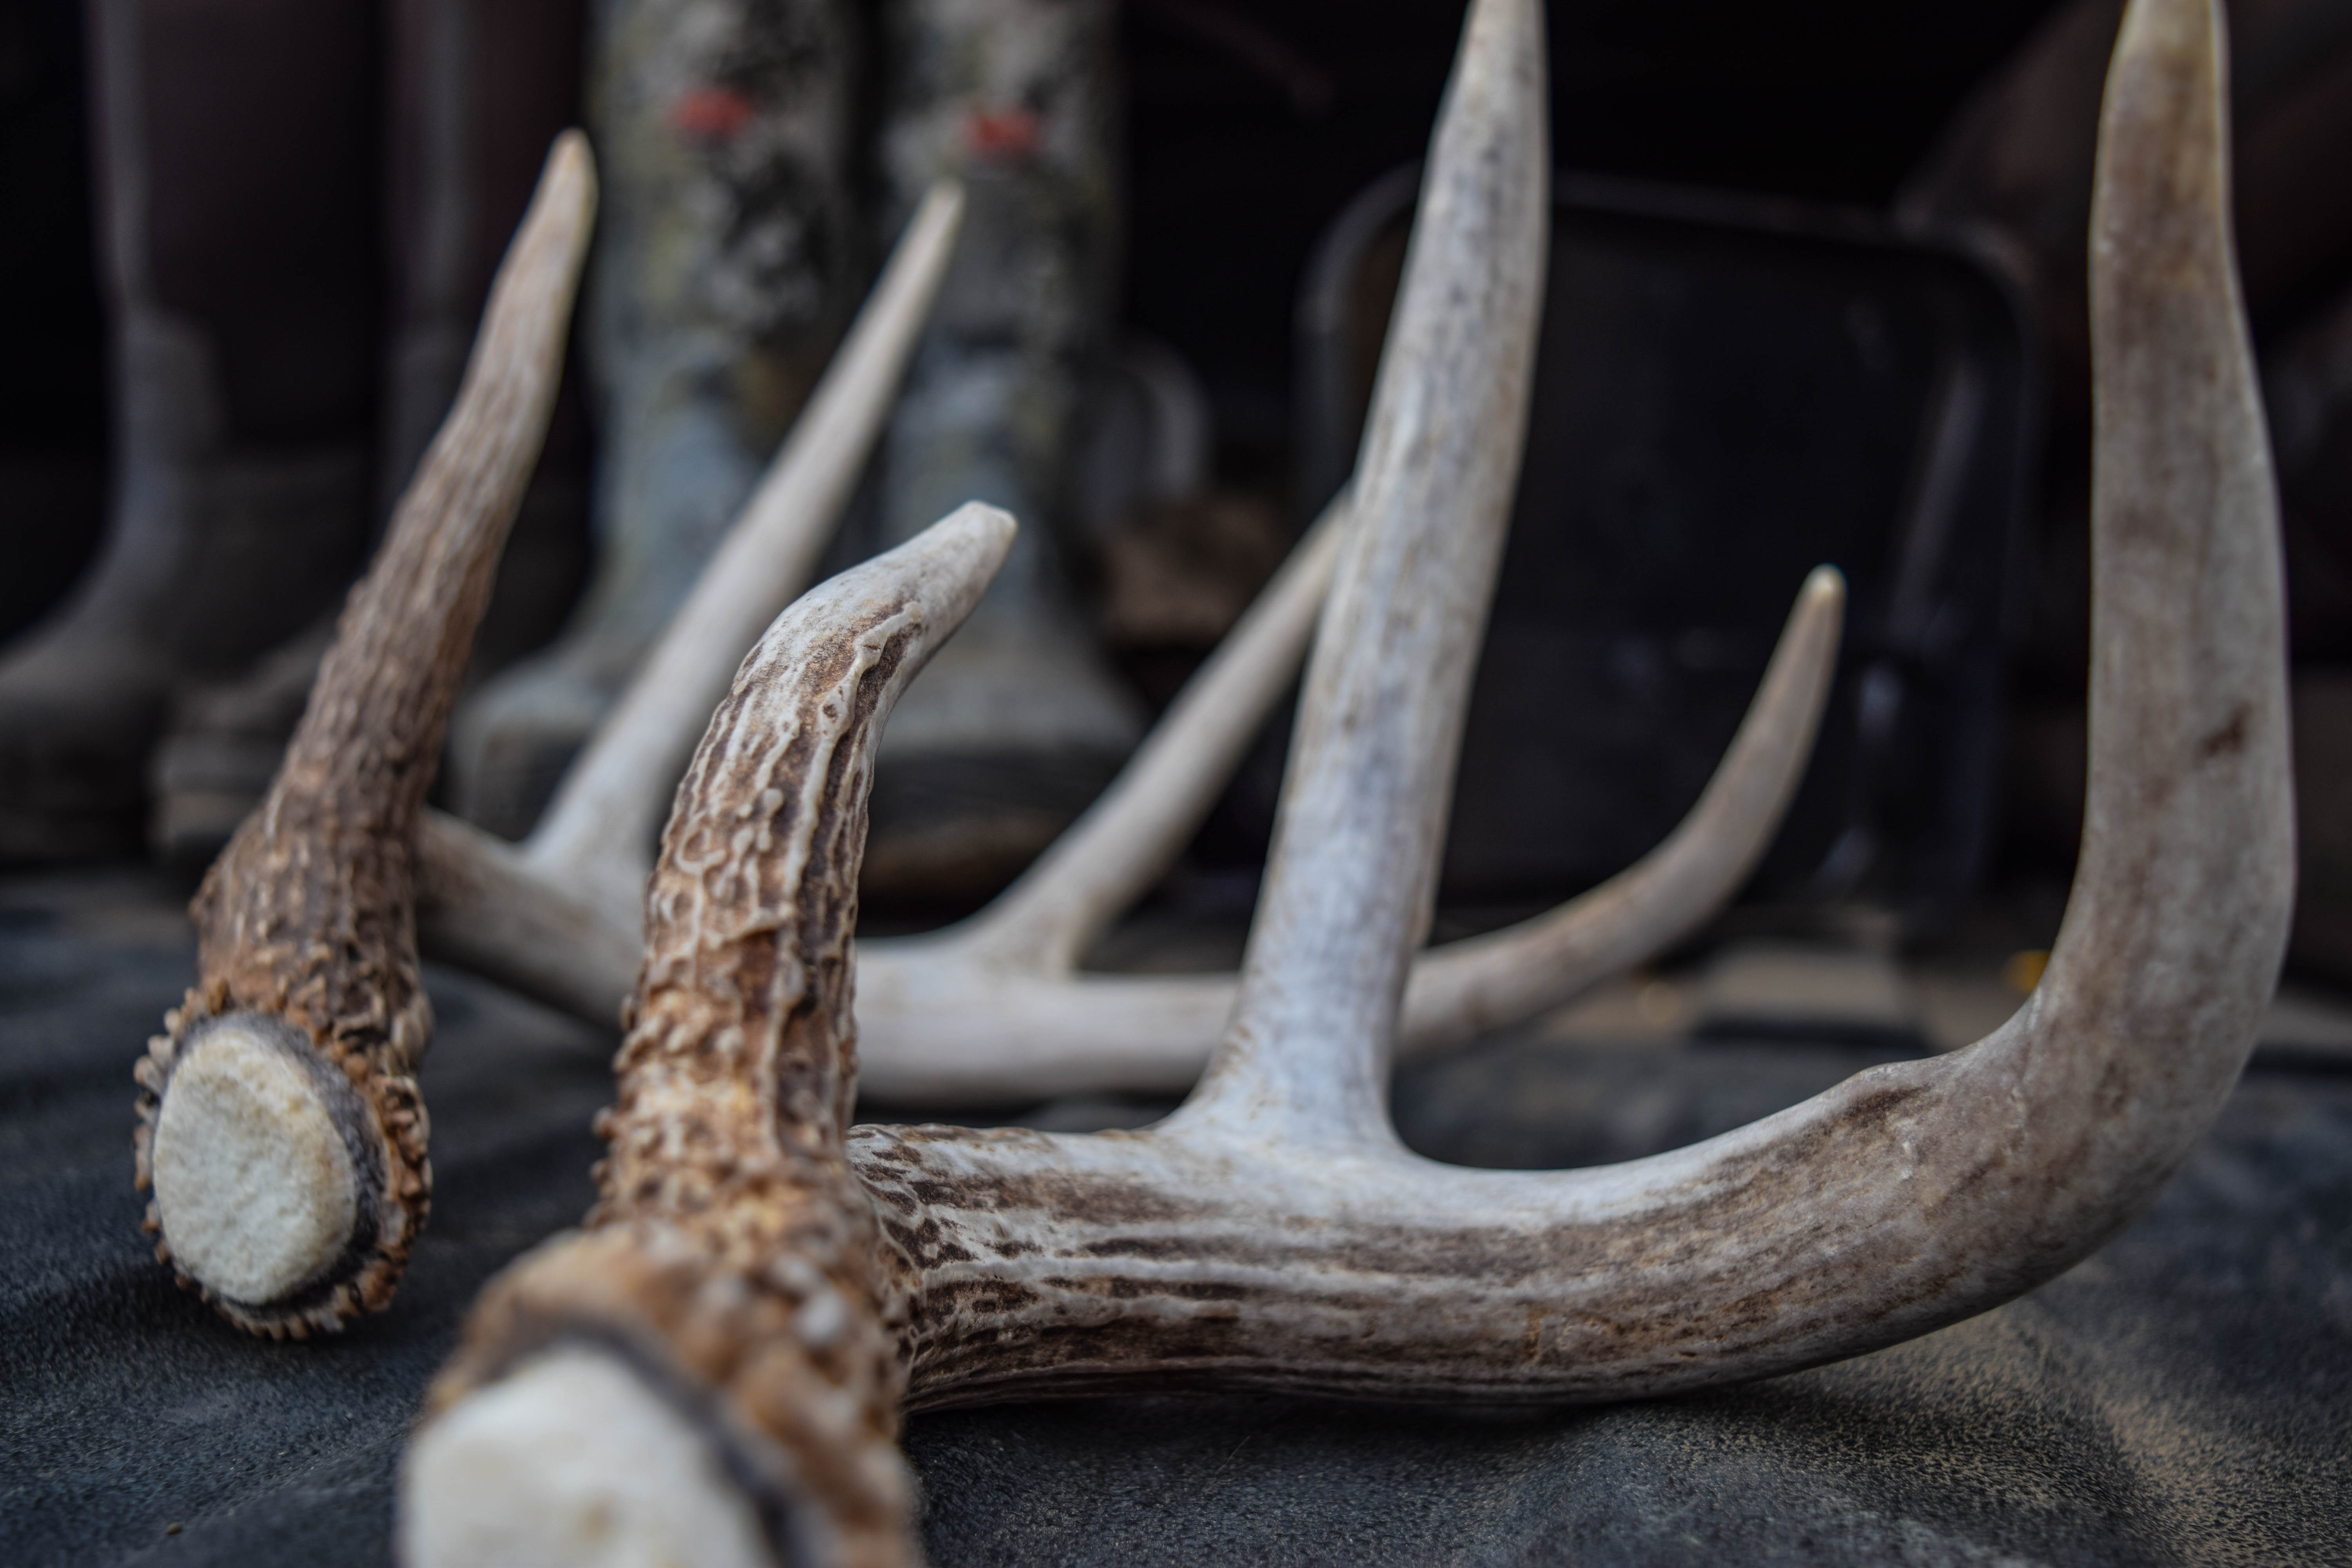 Deer Shed Antlers This Time Every Year. Why Aren't Deer Antlers